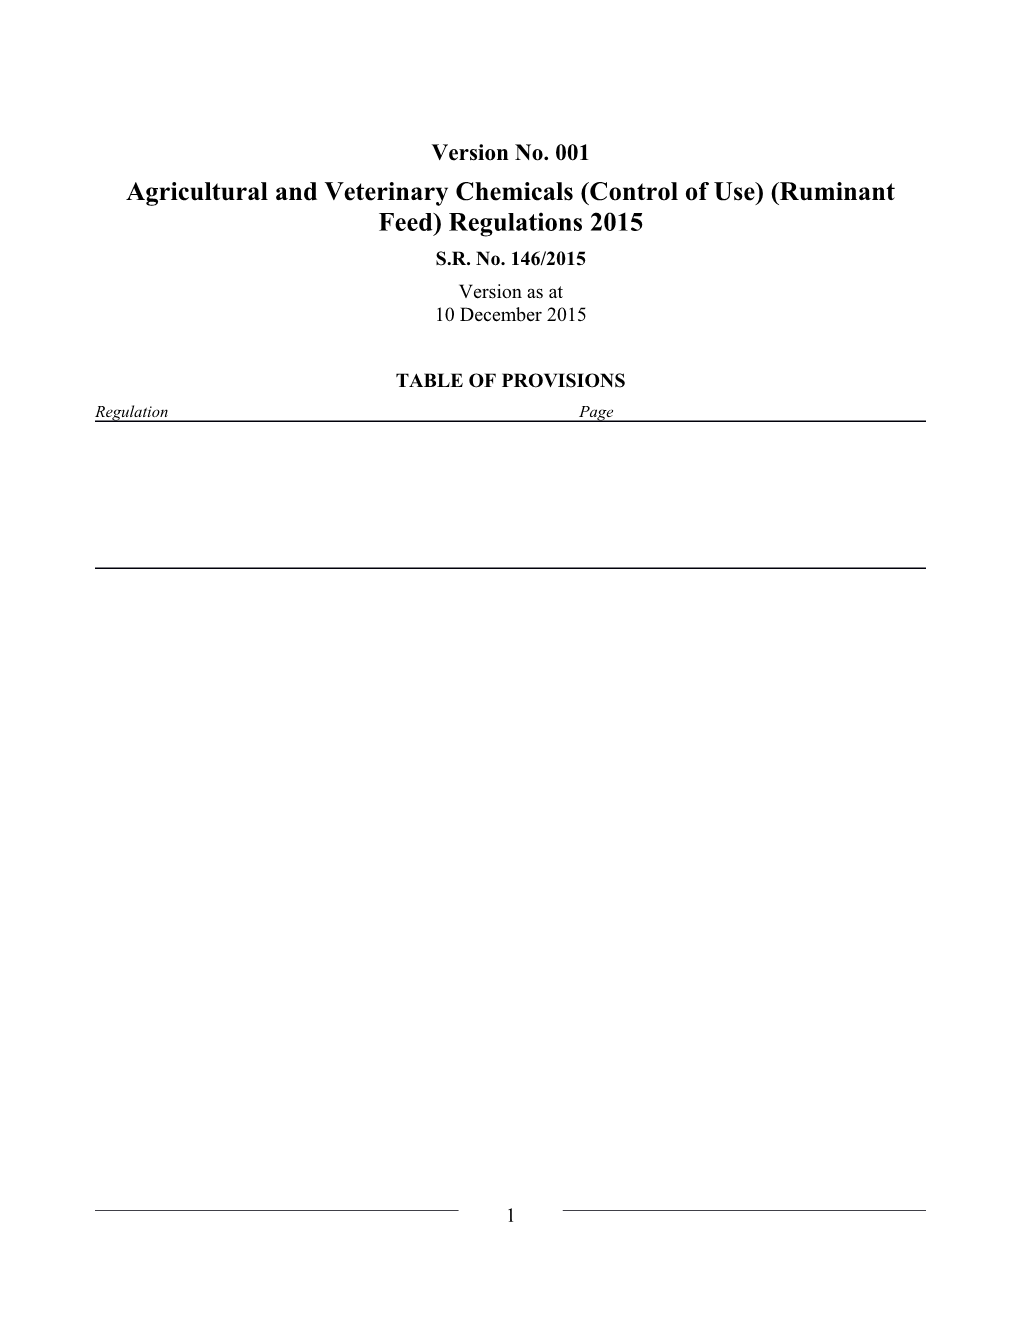 Agricultural and Veterinary Chemicals (Control of Use) (Ruminant Feed) Regulations 2015